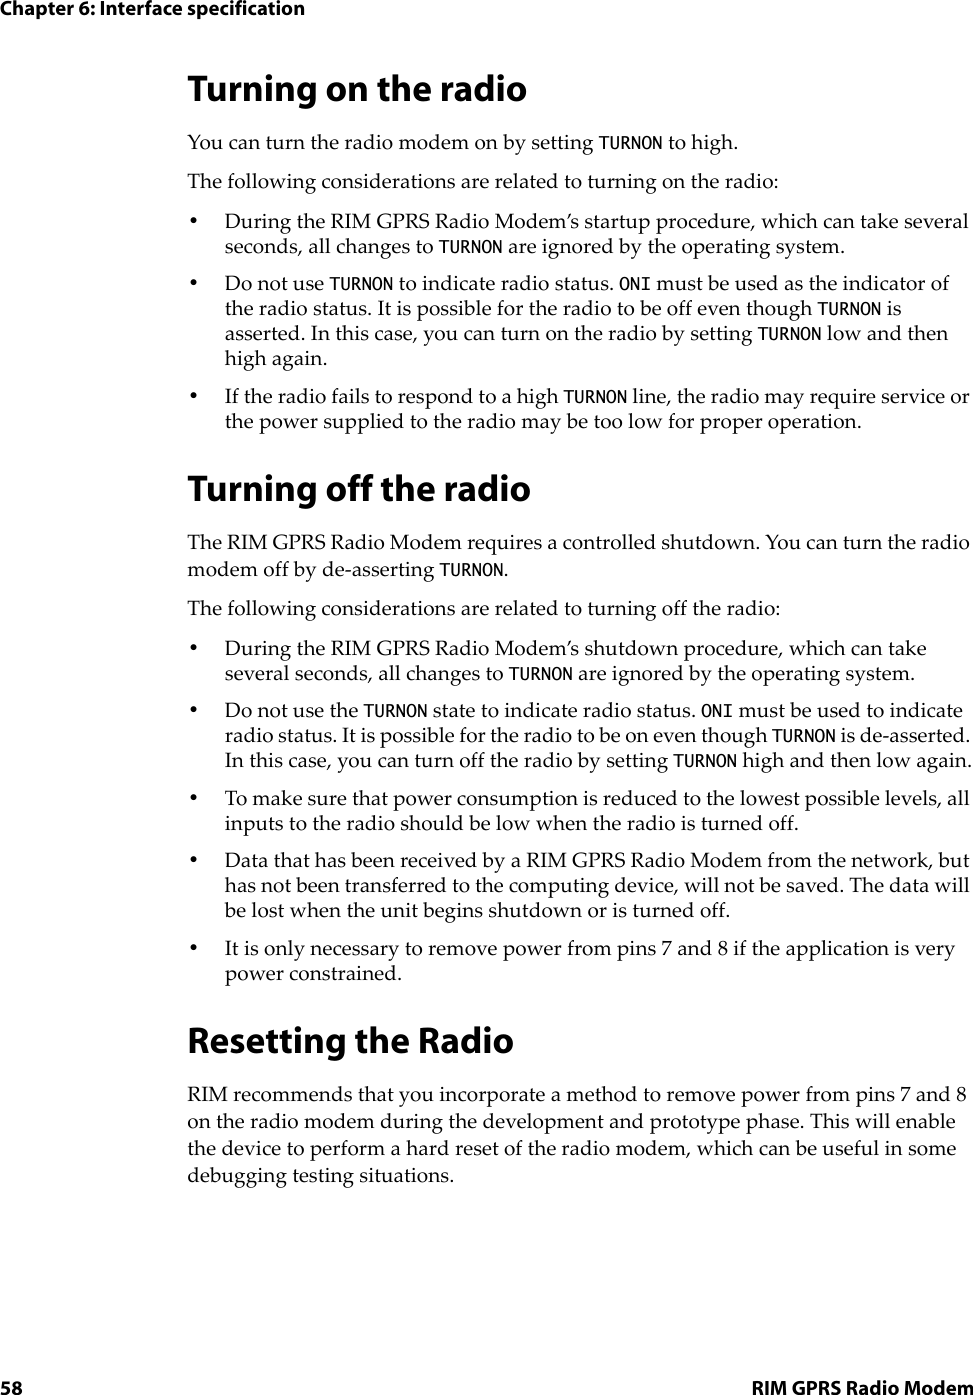 Chapter 6: Interface specification58 RIM GPRS Radio ModemTurning on the radioYou can turn the radio modem on by setting TURNON to high.The following considerations are related to turning on the radio:•During the RIM GPRS Radio Modem’s startup procedure, which can take several seconds, all changes to TURNON are ignored by the operating system.•Do not use TURNON to indicate radio status. ONI must be used as the indicator of the radio status. It is possible for the radio to be off even though TURNON is asserted. In this case, you can turn on the radio by setting TURNON low and then high again.•If the radio fails to respond to a high TURNON line, the radio may require service or the power supplied to the radio may be too low for proper operation.Turning off the radio The RIM GPRS Radio Modem requires a controlled shutdown. You can turn the radio modem off by de-asserting TURNON. The following considerations are related to turning off the radio:•During the RIM GPRS Radio Modem’s shutdown procedure, which can take several seconds, all changes to TURNON are ignored by the operating system.•Do not use the TURNON state to indicate radio status. ONI must be used to indicate radio status. It is possible for the radio to be on even though TURNON is de-asserted. In this case, you can turn off the radio by setting TURNON high and then low again.•To make sure that power consumption is reduced to the lowest possible levels, all inputs to the radio should be low when the radio is turned off.•Data that has been received by a RIM GPRS Radio Modem from the network, but has not been transferred to the computing device, will not be saved. The data will be lost when the unit begins shutdown or is turned off.•It is only necessary to remove power from pins 7 and 8 if the application is very power constrained.Resetting the RadioRIM recommends that you incorporate a method to remove power from pins 7 and 8 on the radio modem during the development and prototype phase. This will enable the device to perform a hard reset of the radio modem, which can be useful in some debugging testing situations.